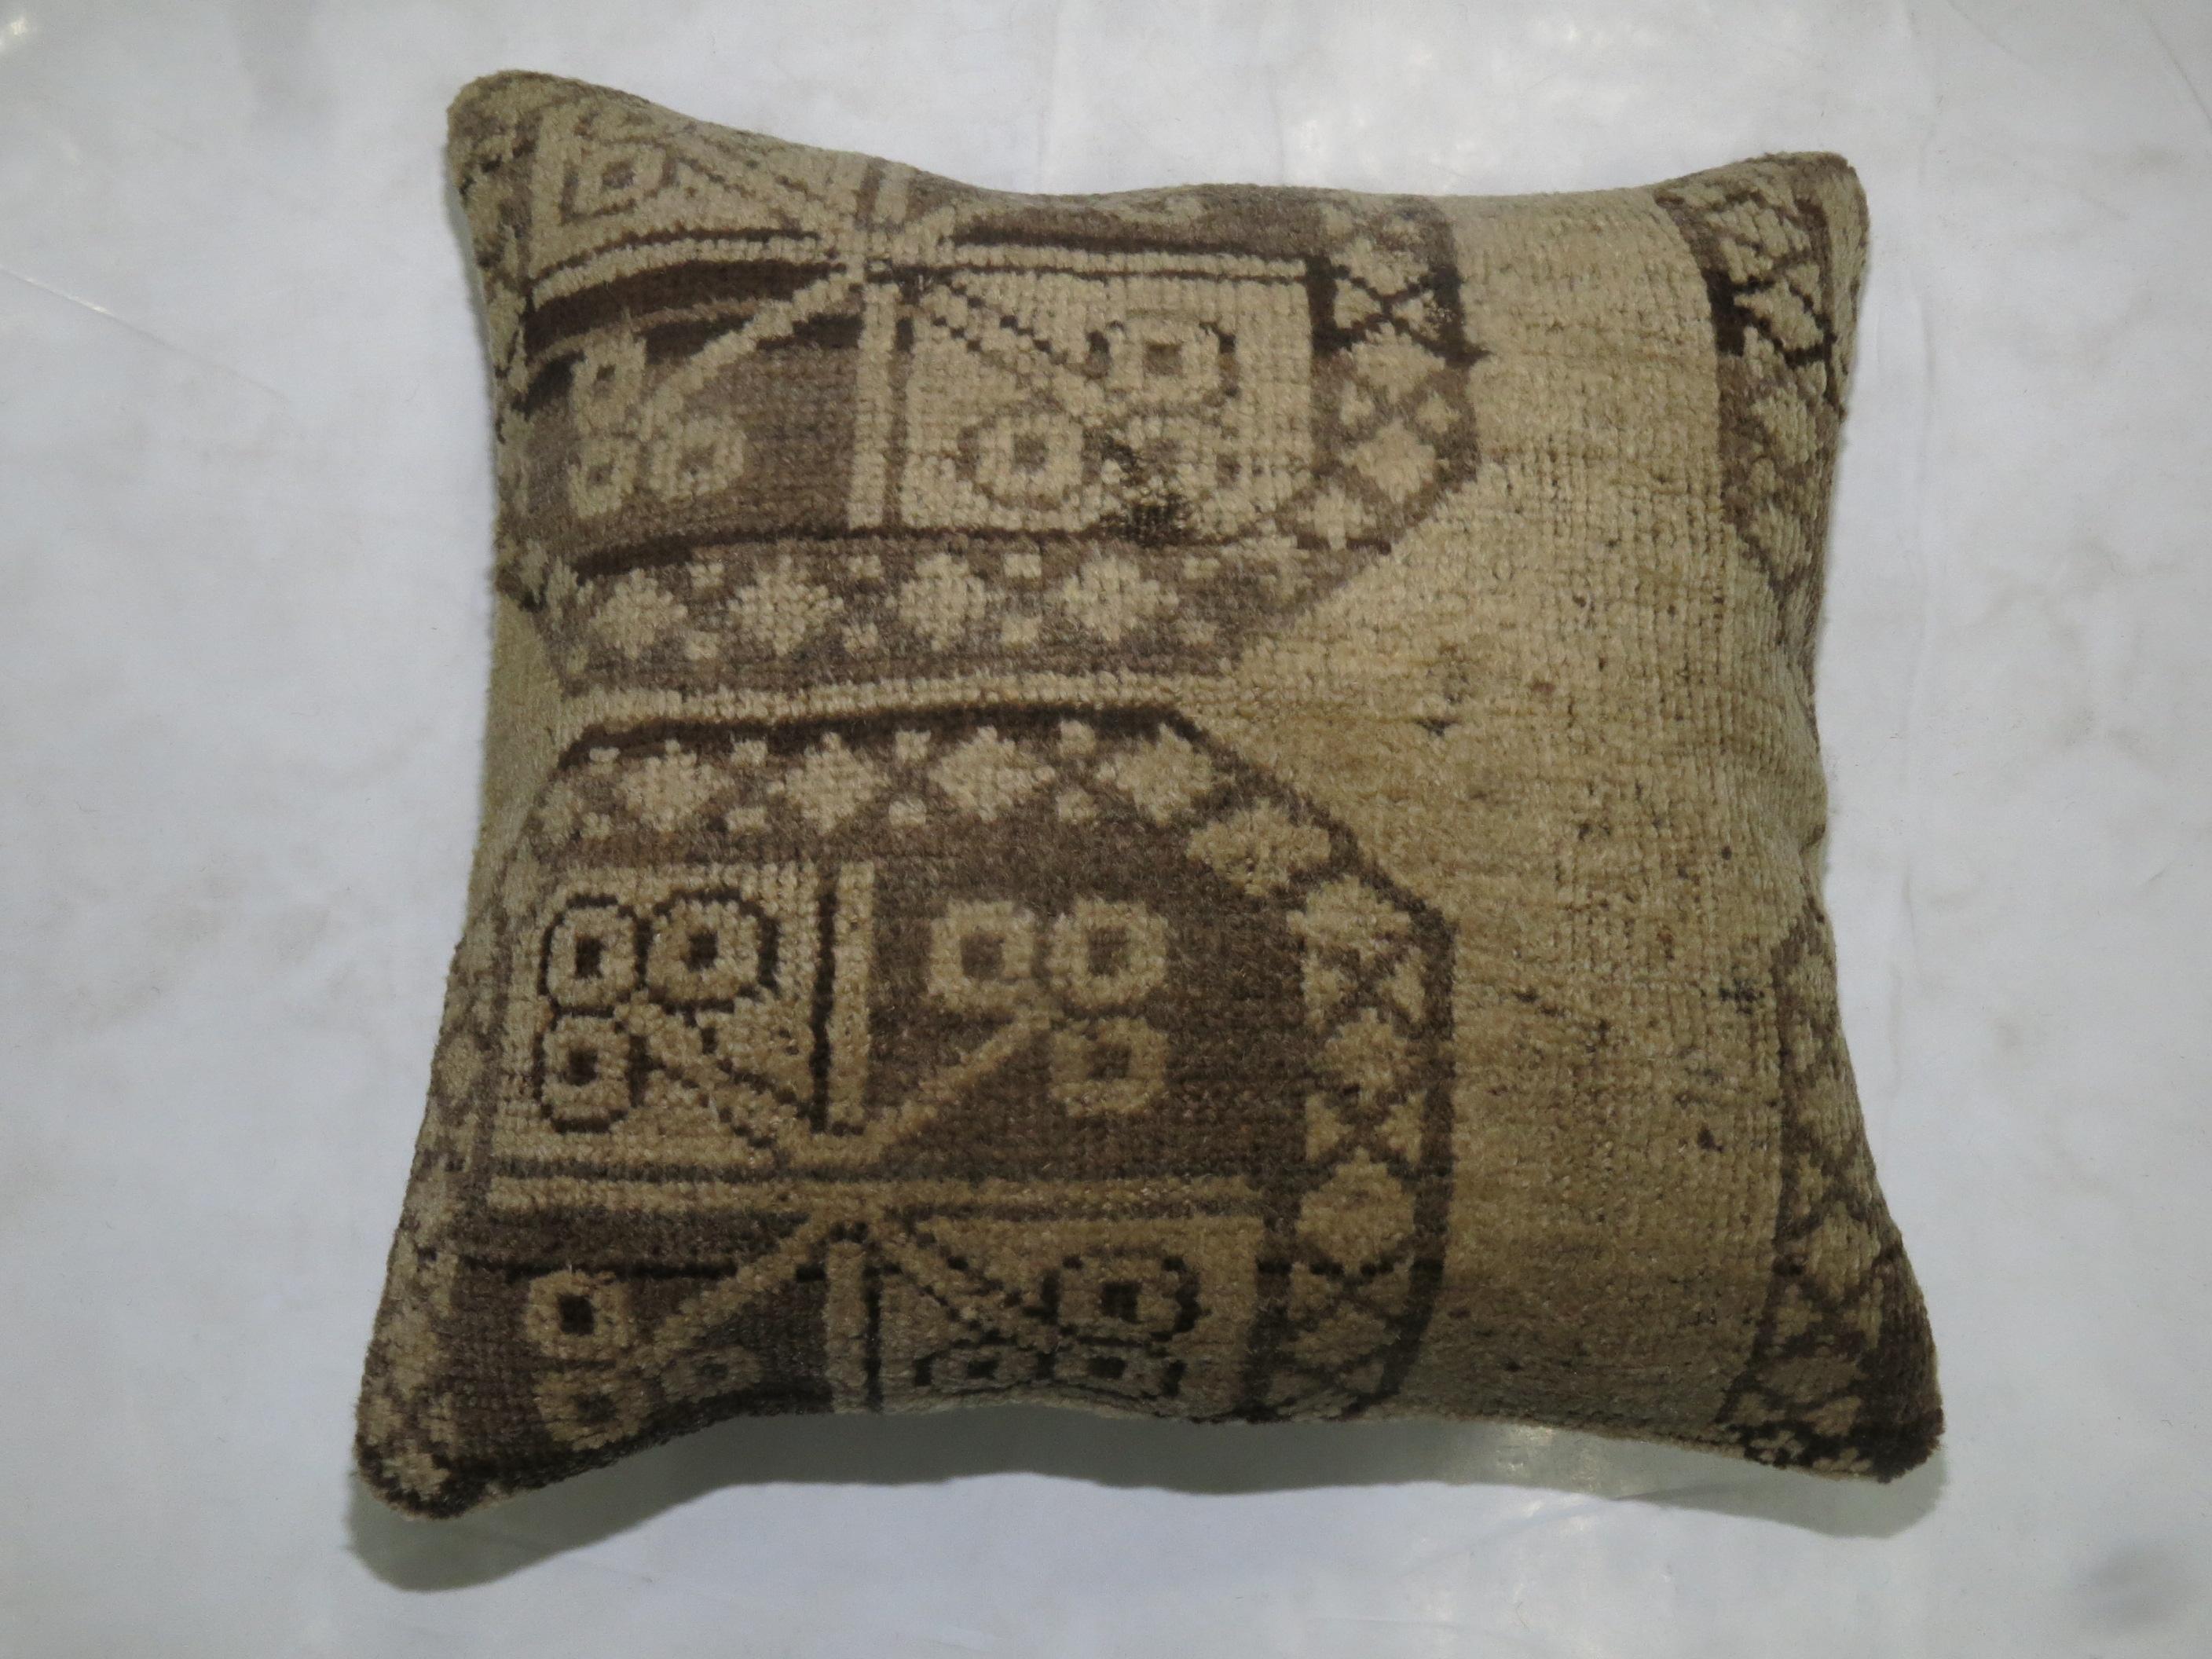 Large pillow made from an early 20th century antique Afghan Ersari rug with cotton back. Polyfill zipper closure provided

Size: 17